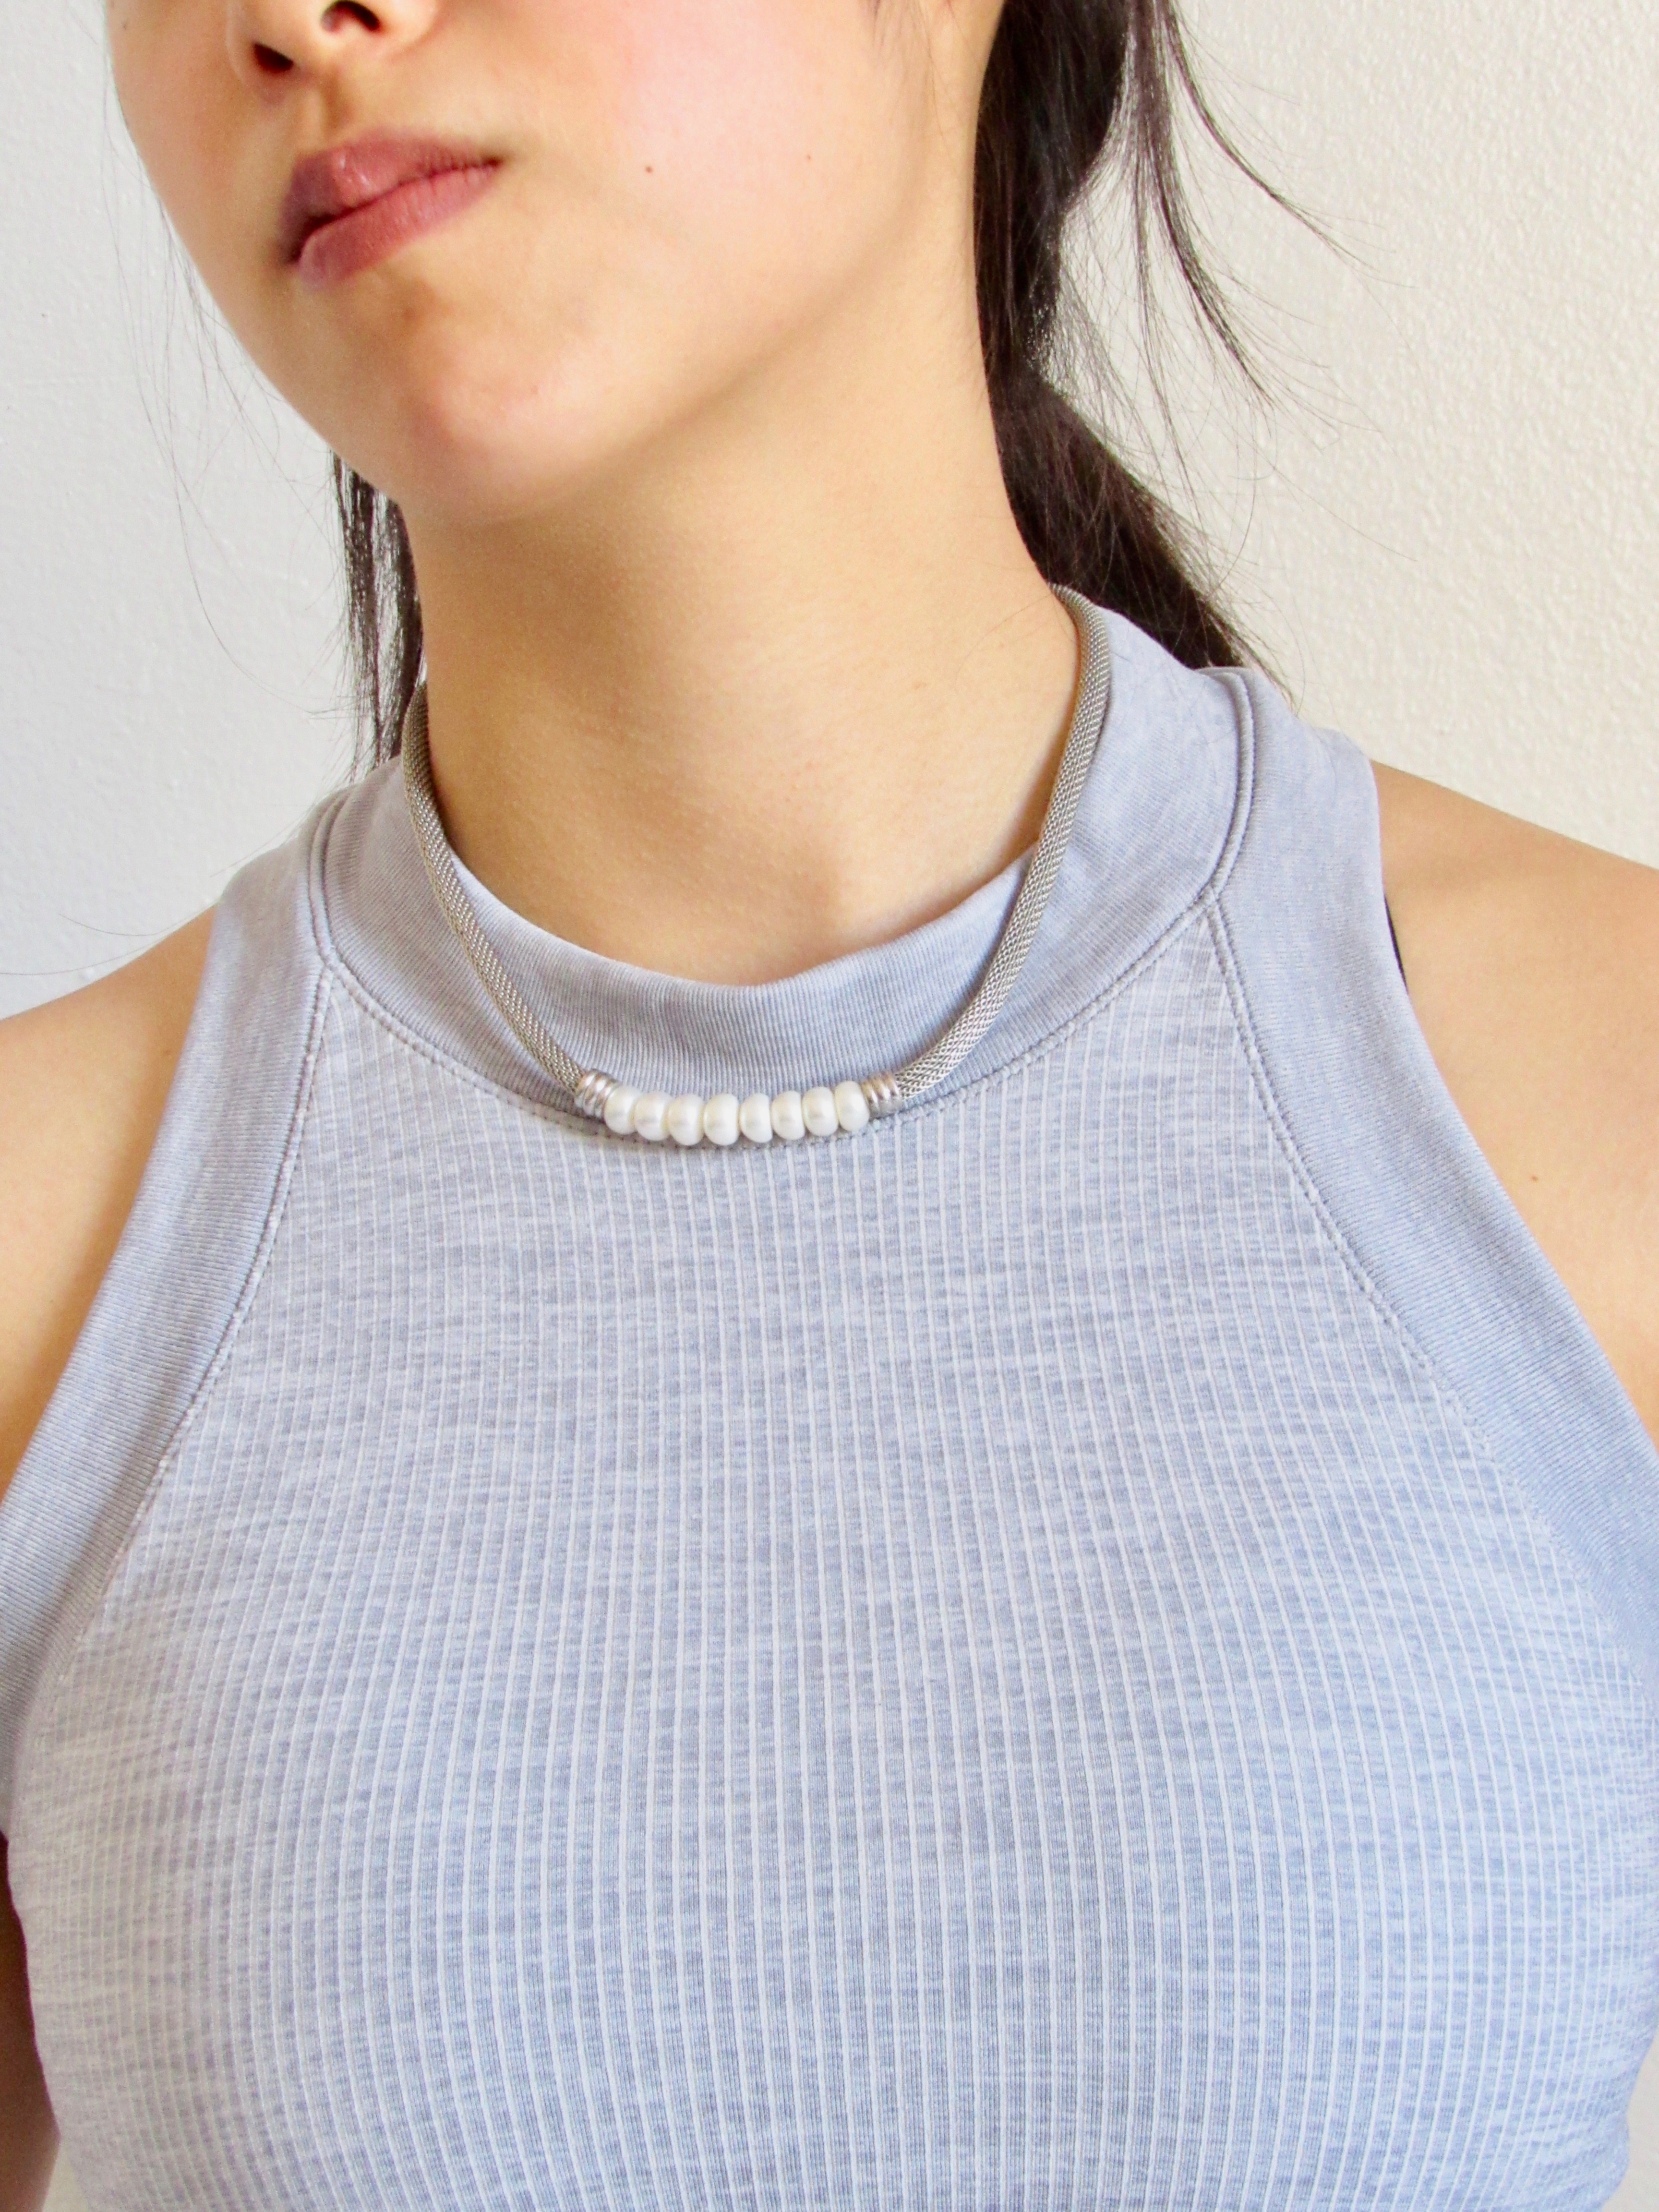 Vintage Pearl Silver Rope Necklace